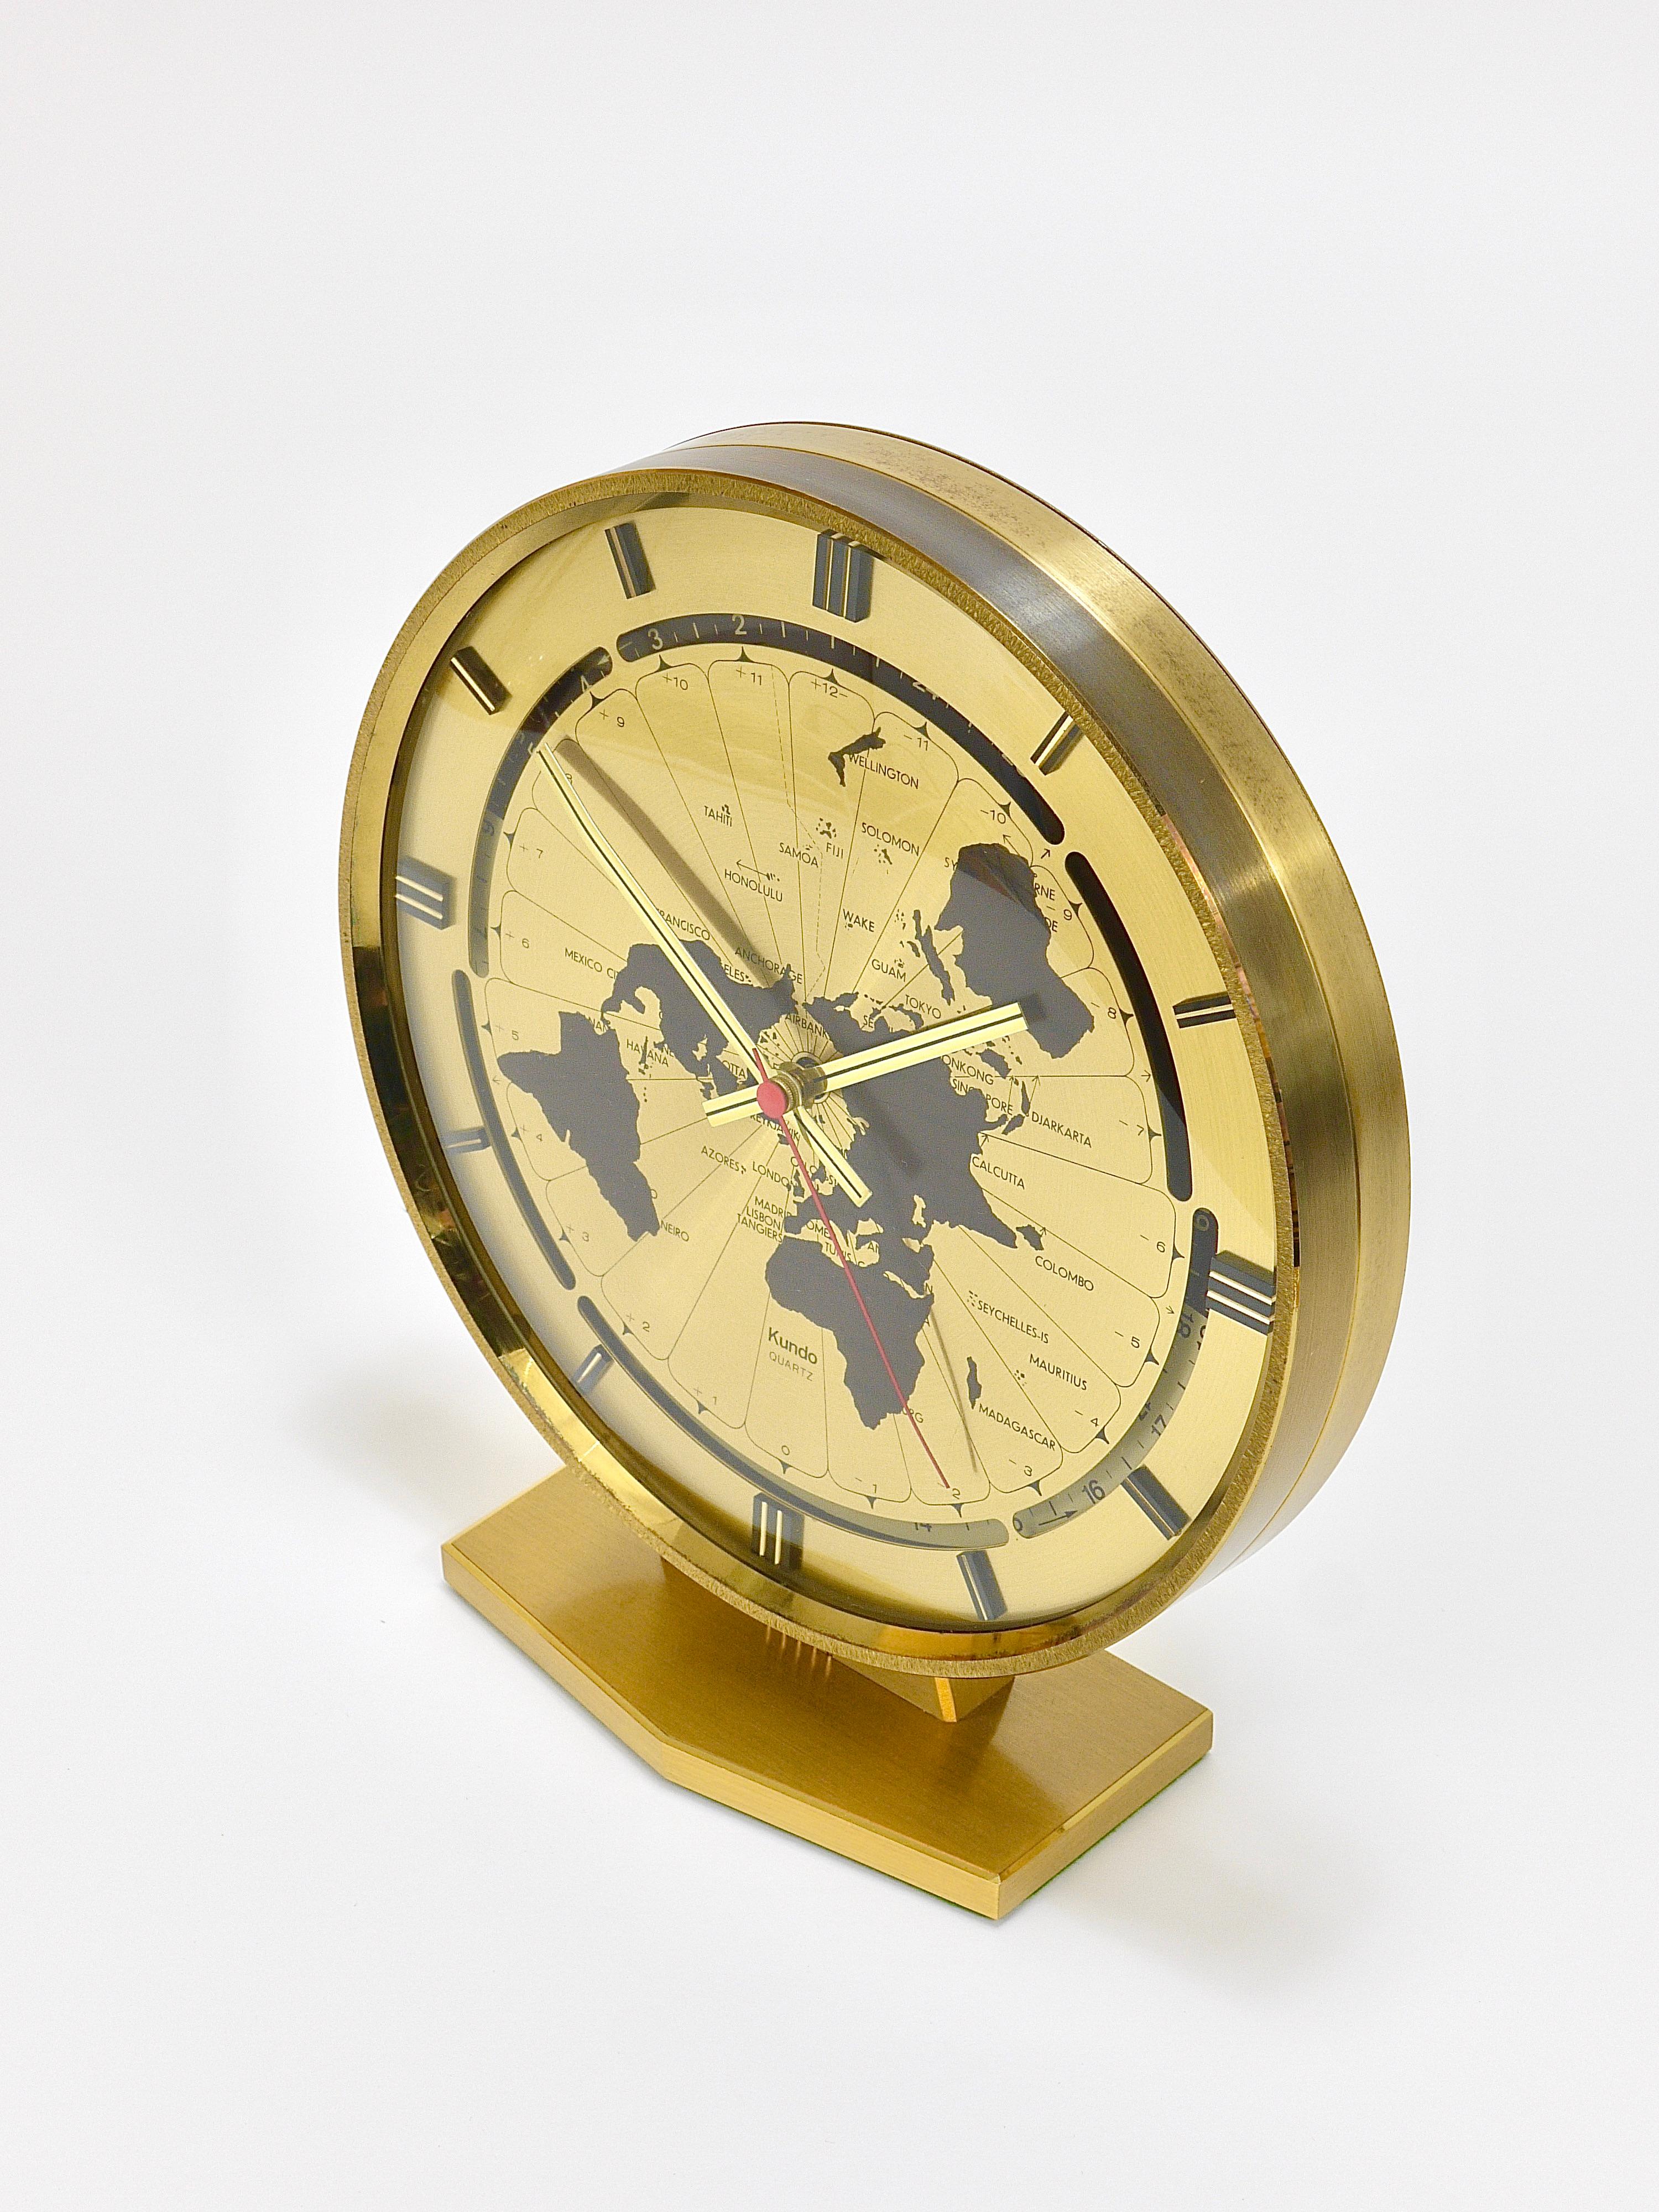 Large Kundo GMT World Time Zone Brass Table Clock, Kieninger & Obergfell, 1960s For Sale 3